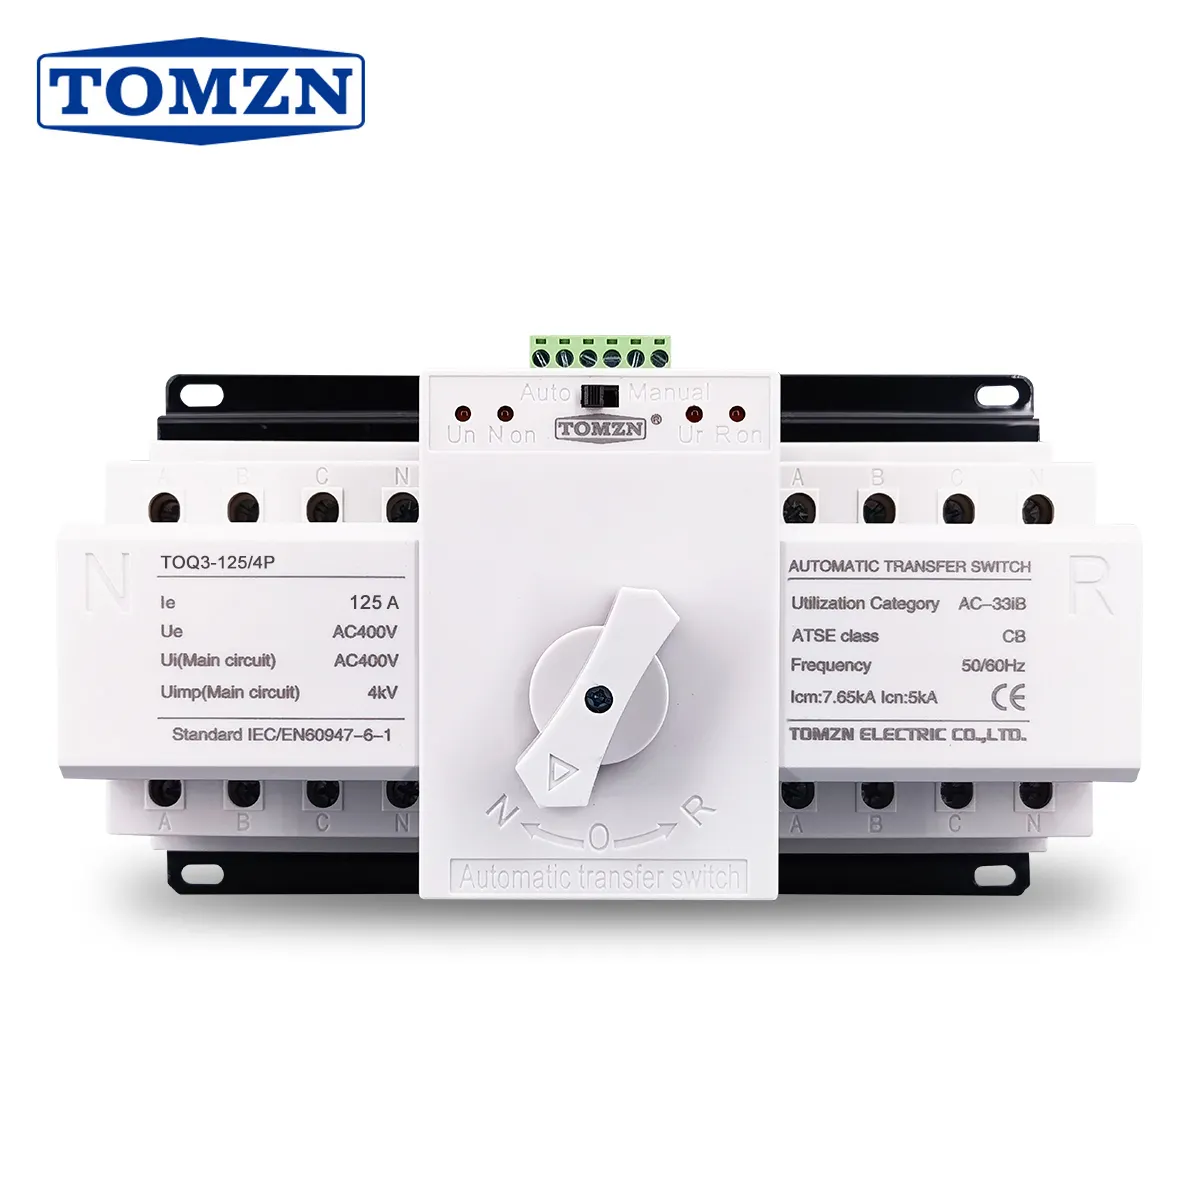 Interruptor de transferencia utomática, 3 fases, 4 cables, 230V Mtype tipo UAL ower enerenerswitch TOQ3-4P ener/ 125 Pener